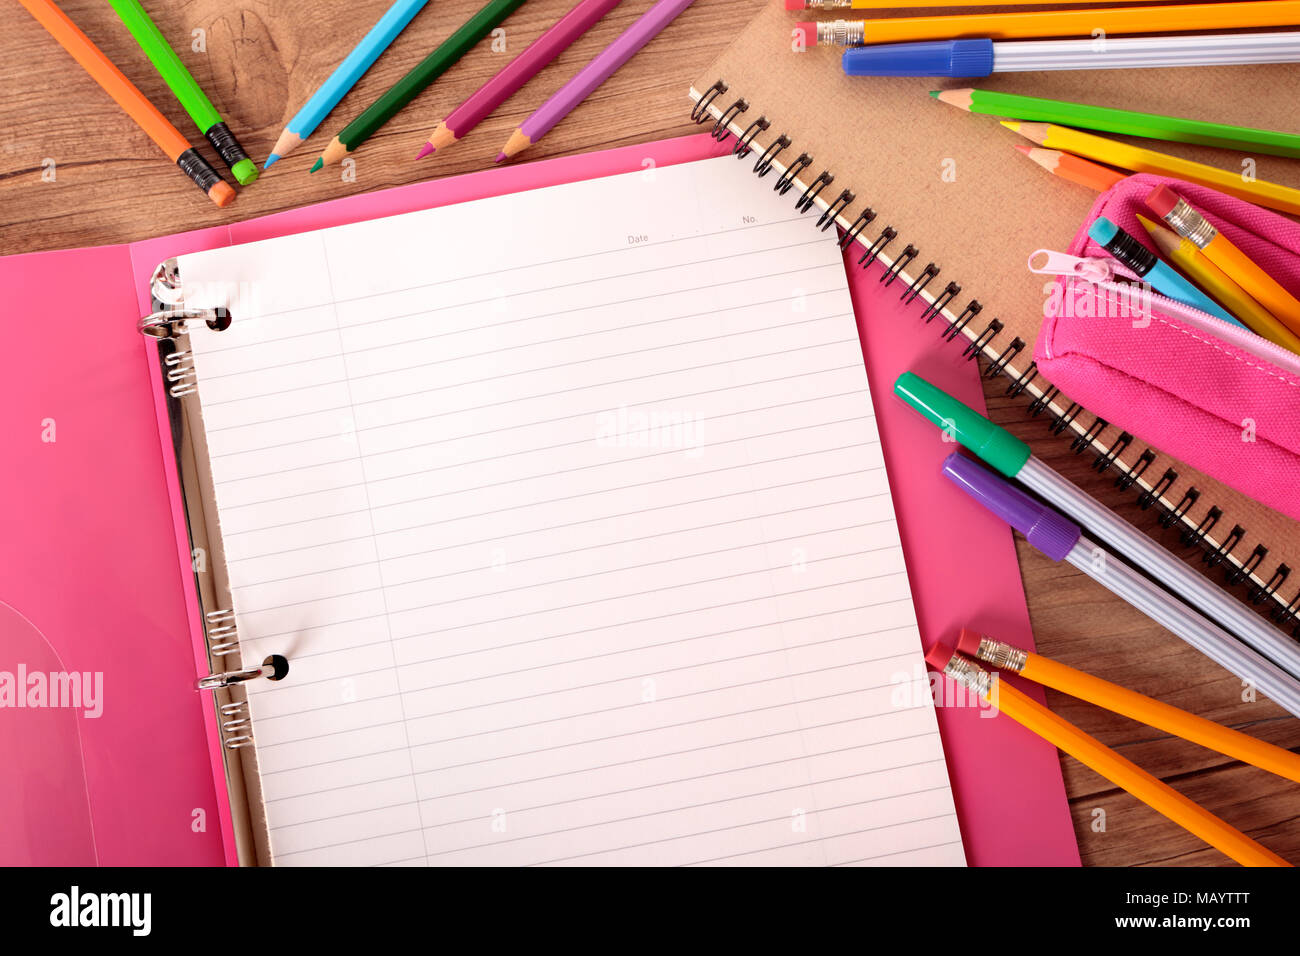 Busy student's desk with pink project folder surrounded by pens, pencils and notebooks. Stock Photo